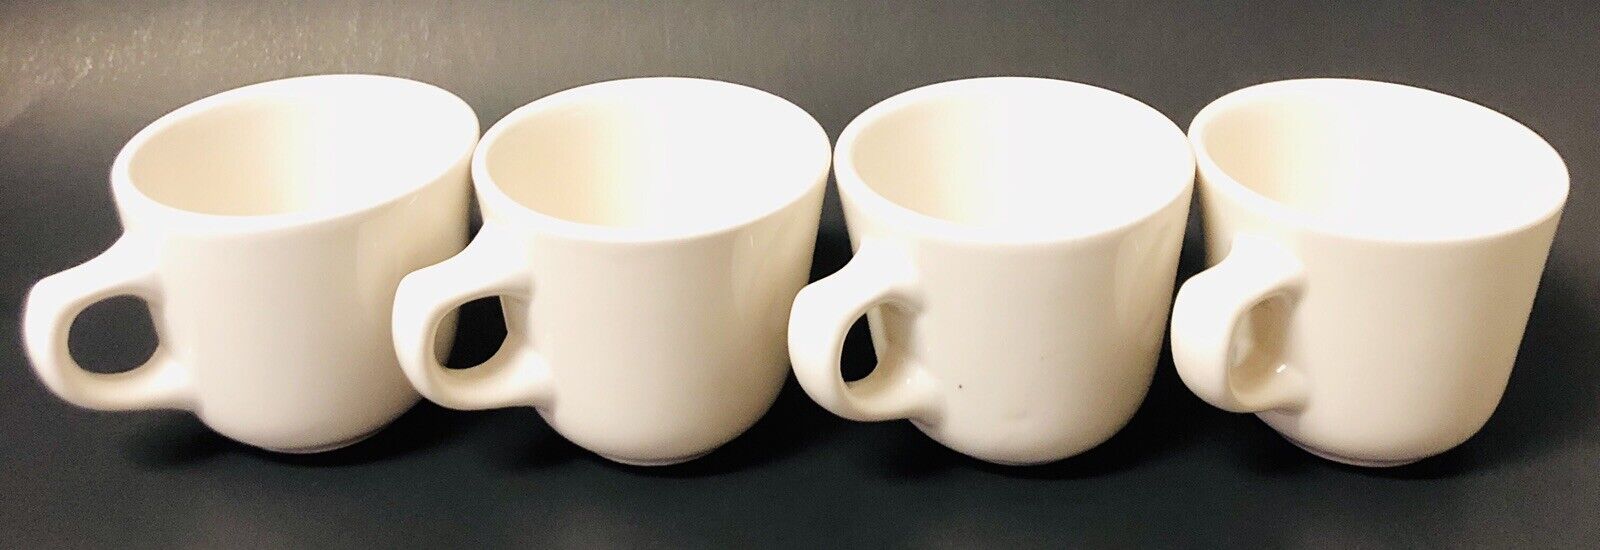 Vintage HLC Homer Laughlin Restaurant Ware China Small Coffee Cup Mug Set Of 4